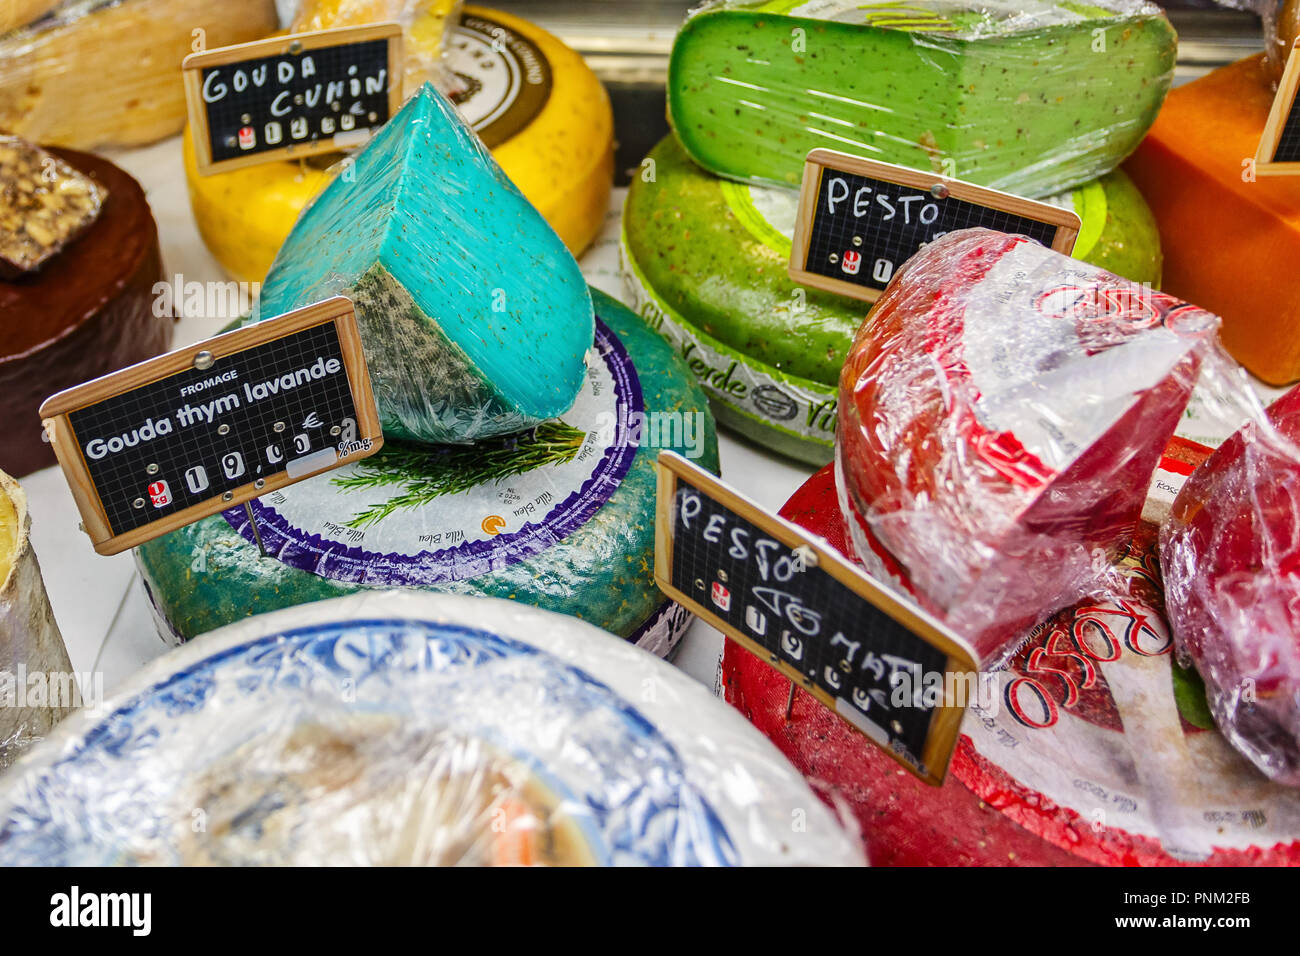 DIJON, FRANCE - AUGUST 10, 2017: Different kinds of cheeses on the market in Dijon Stock Photo